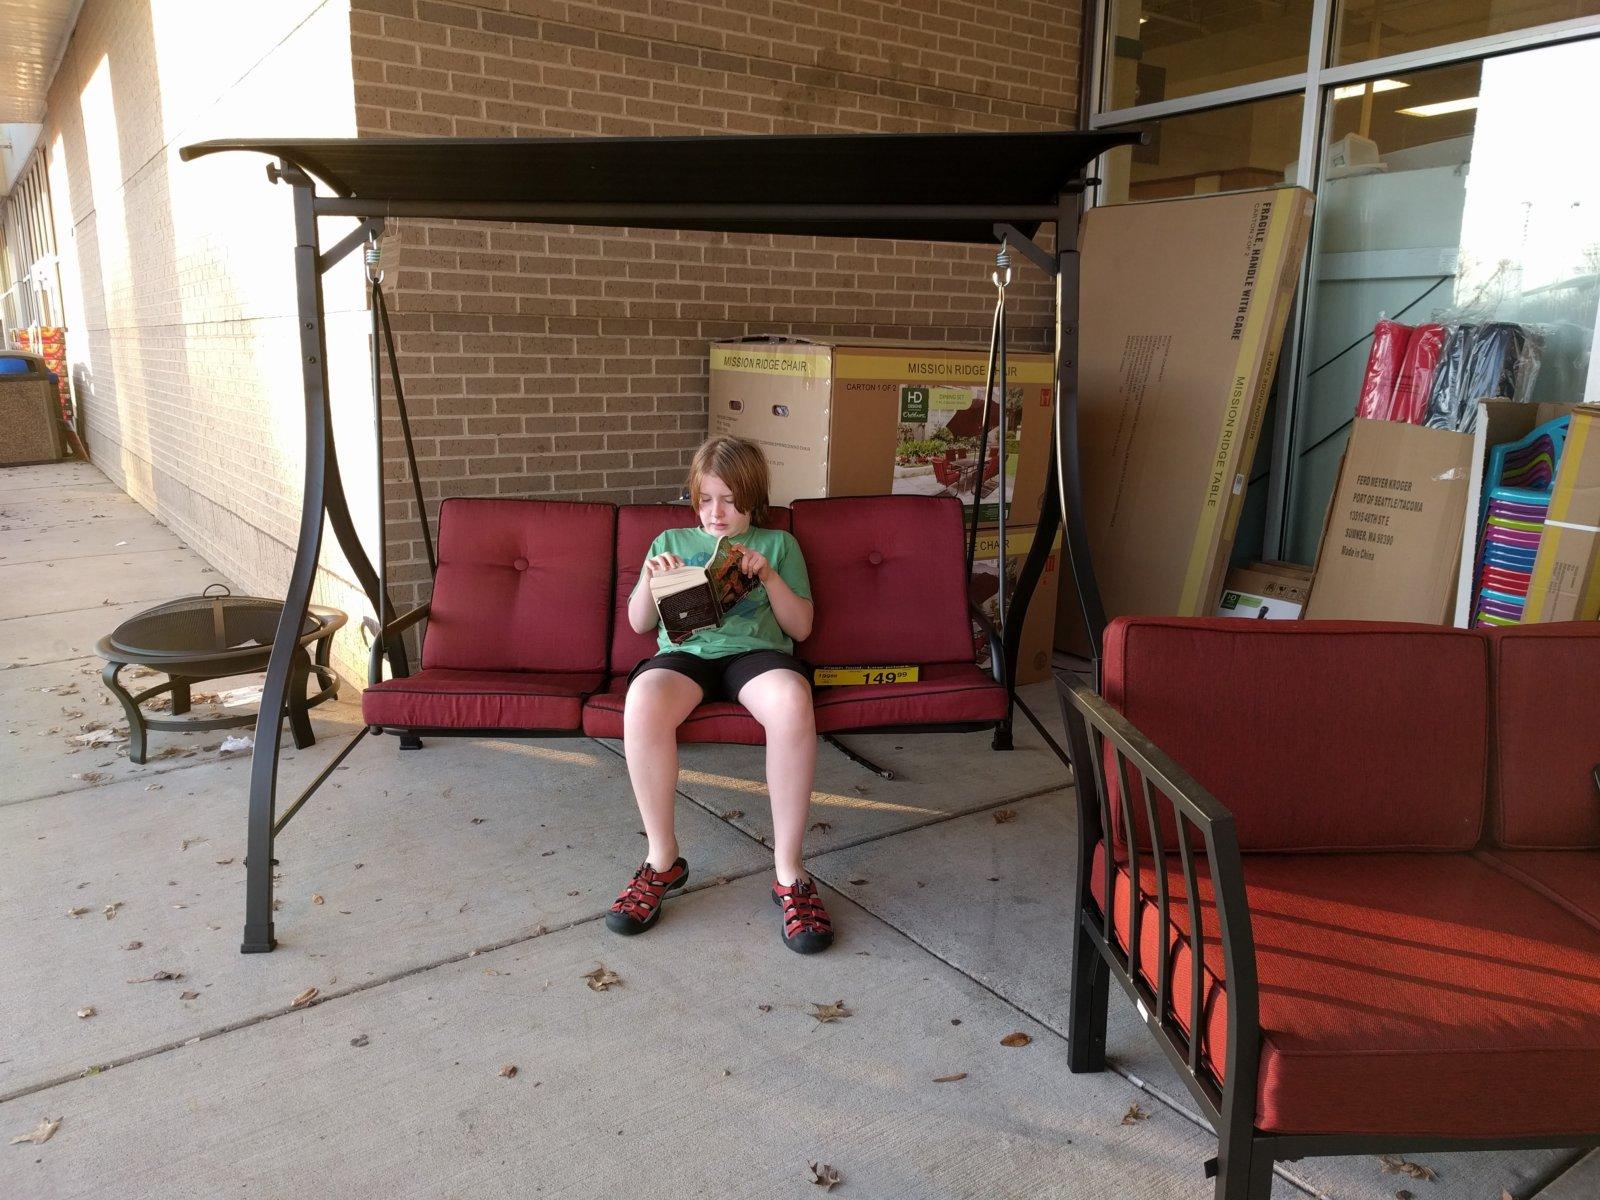 Getting a couple hours of reading in while waiting for his sisters.